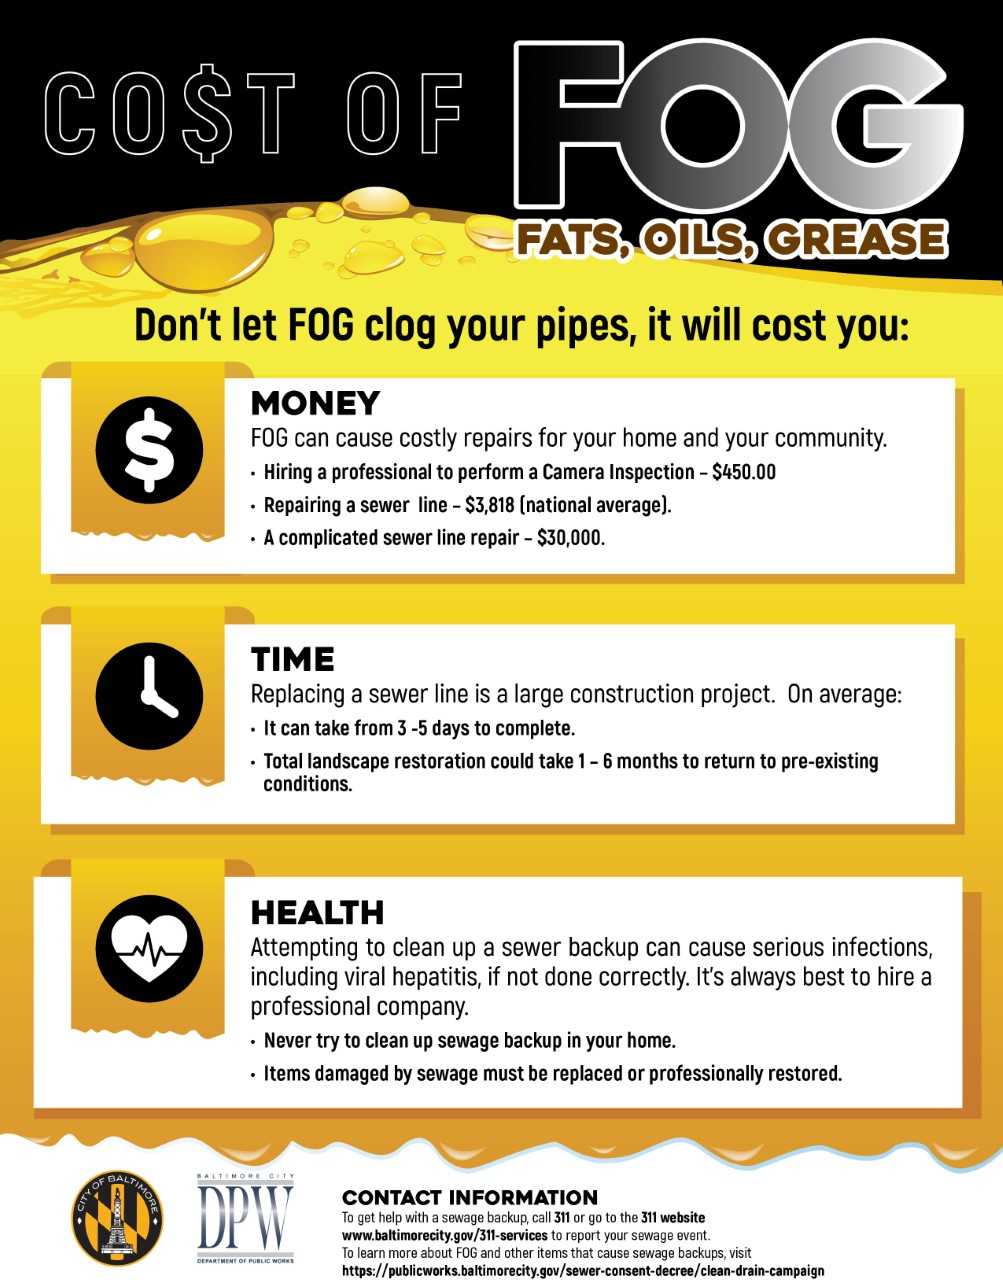 Fats Oils and Grease flyer tips